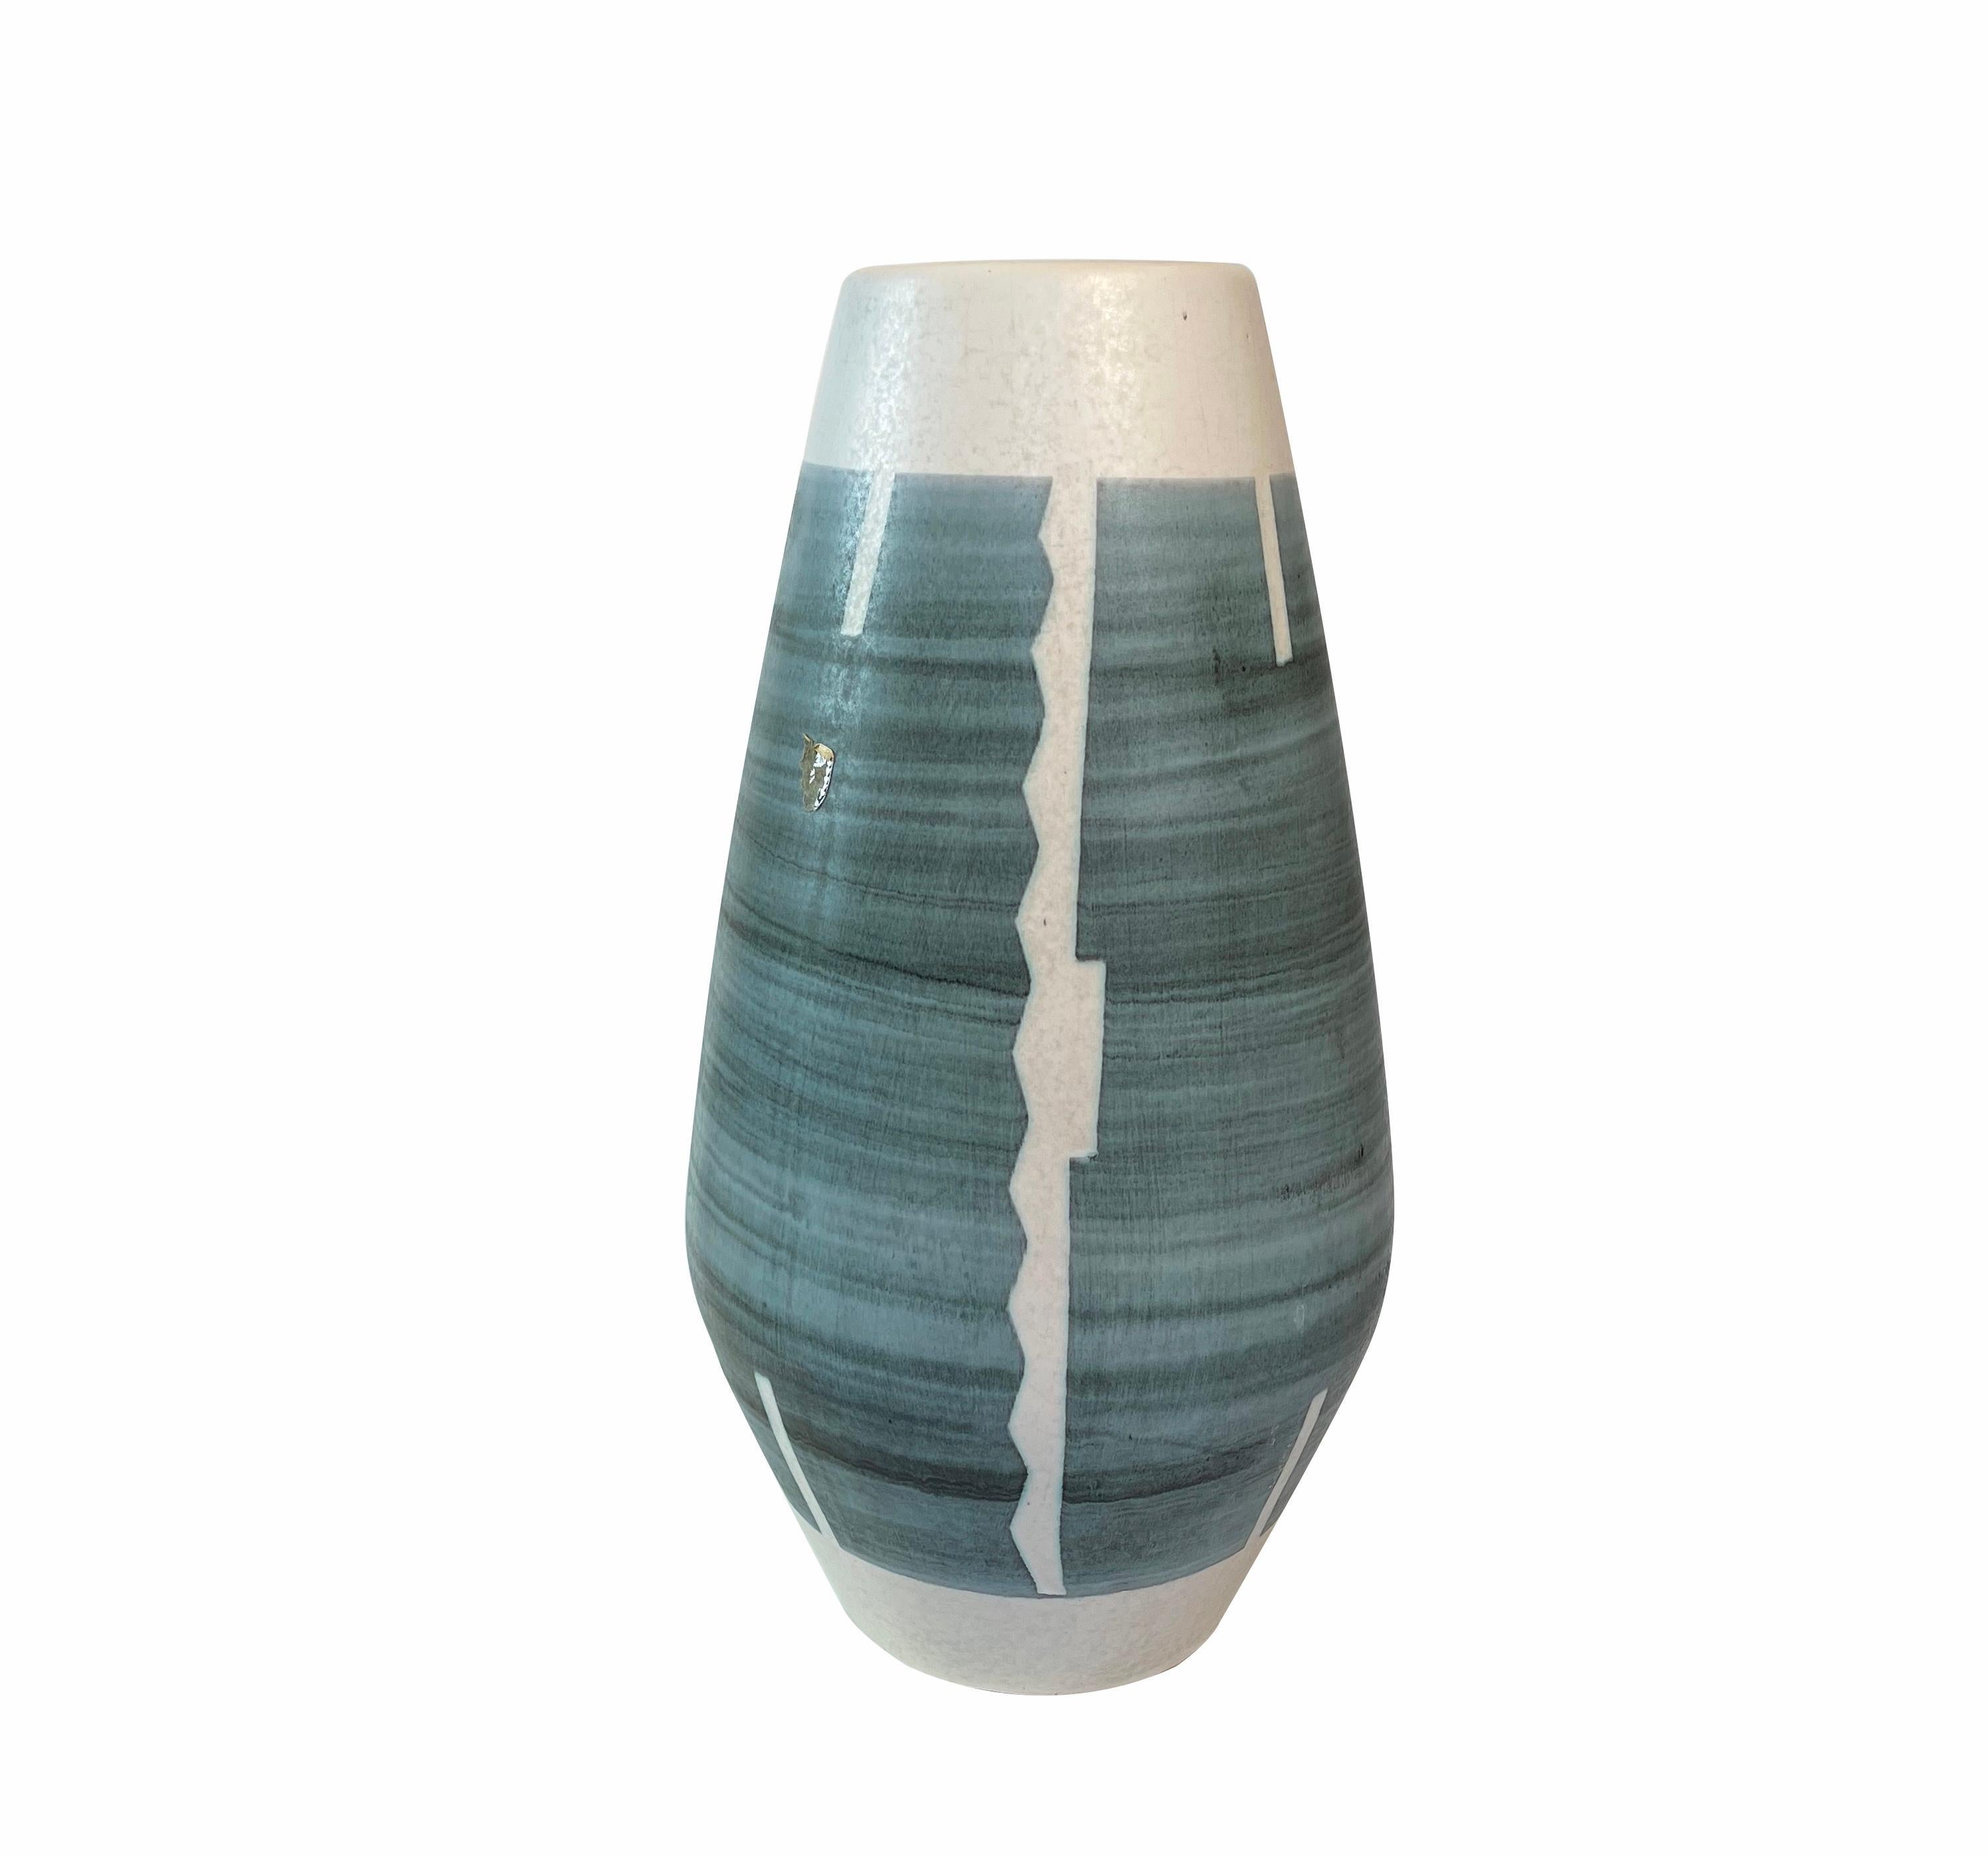 Hand-Crafted Large Modernist Ethnic Type West German Floor Vase by Fohr Pottery, circa 1965 For Sale